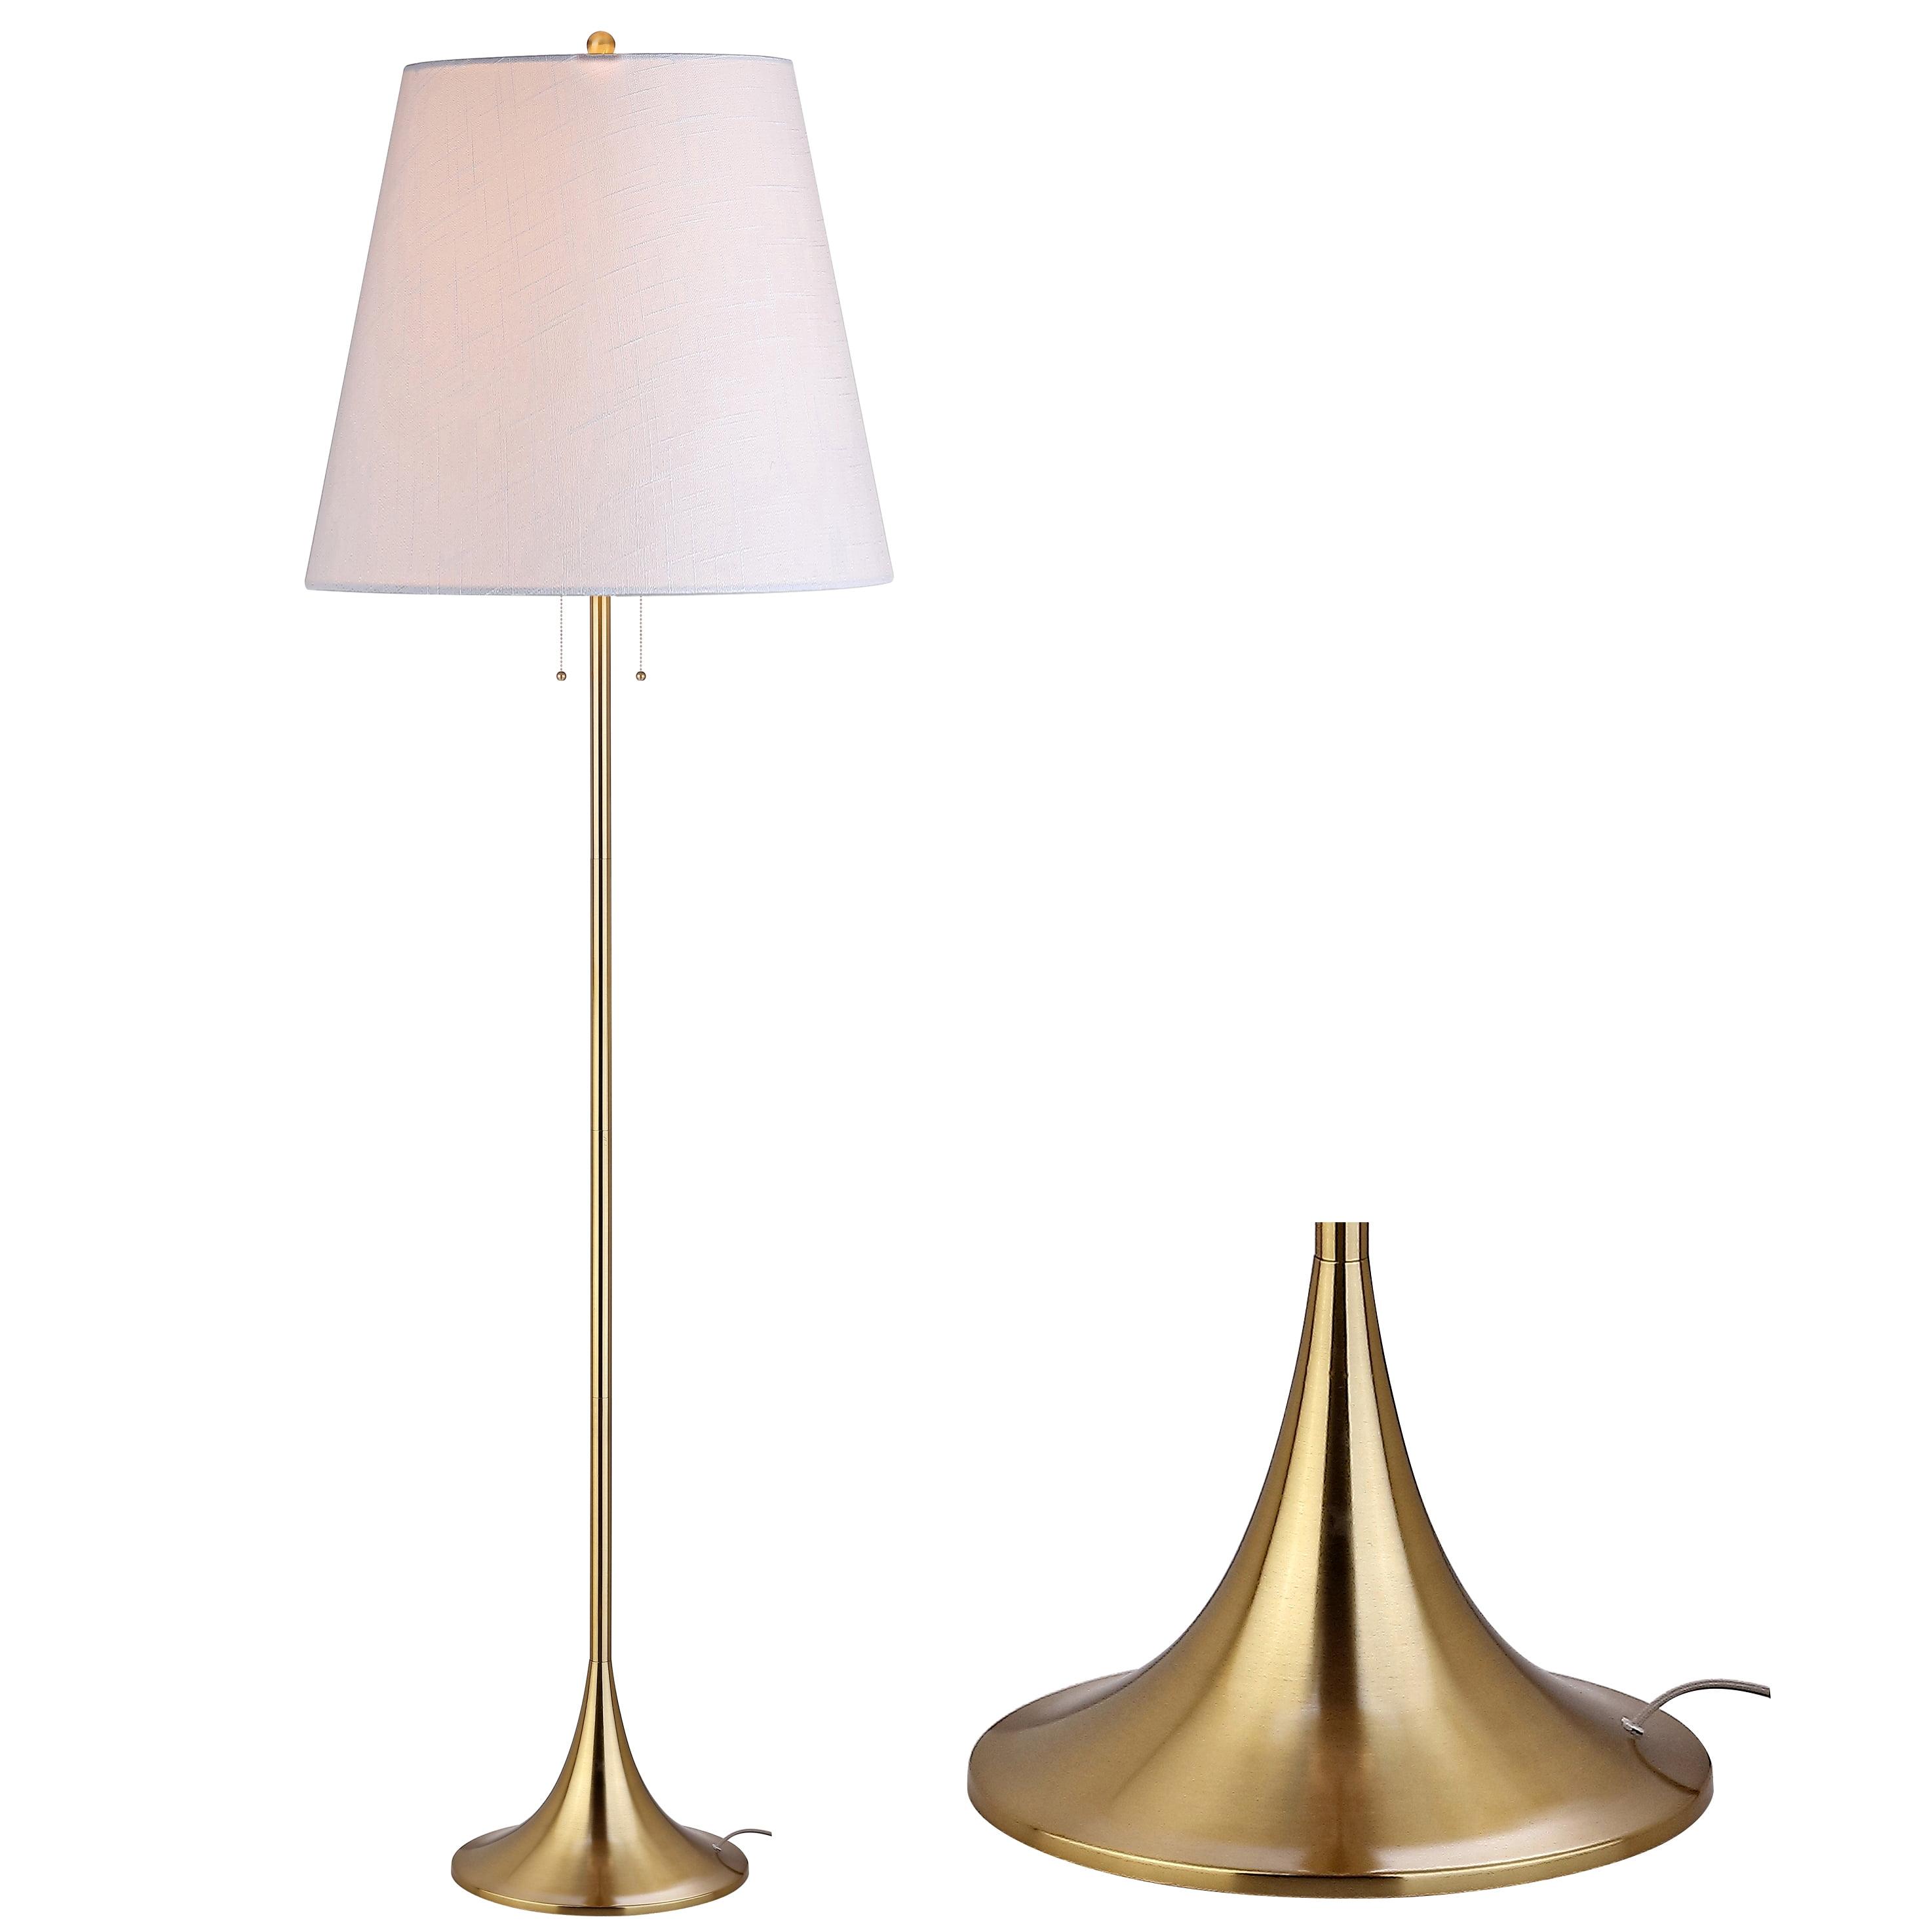 Amelia Contemporary 63" Brass Floor Lamp with White Linen Shade